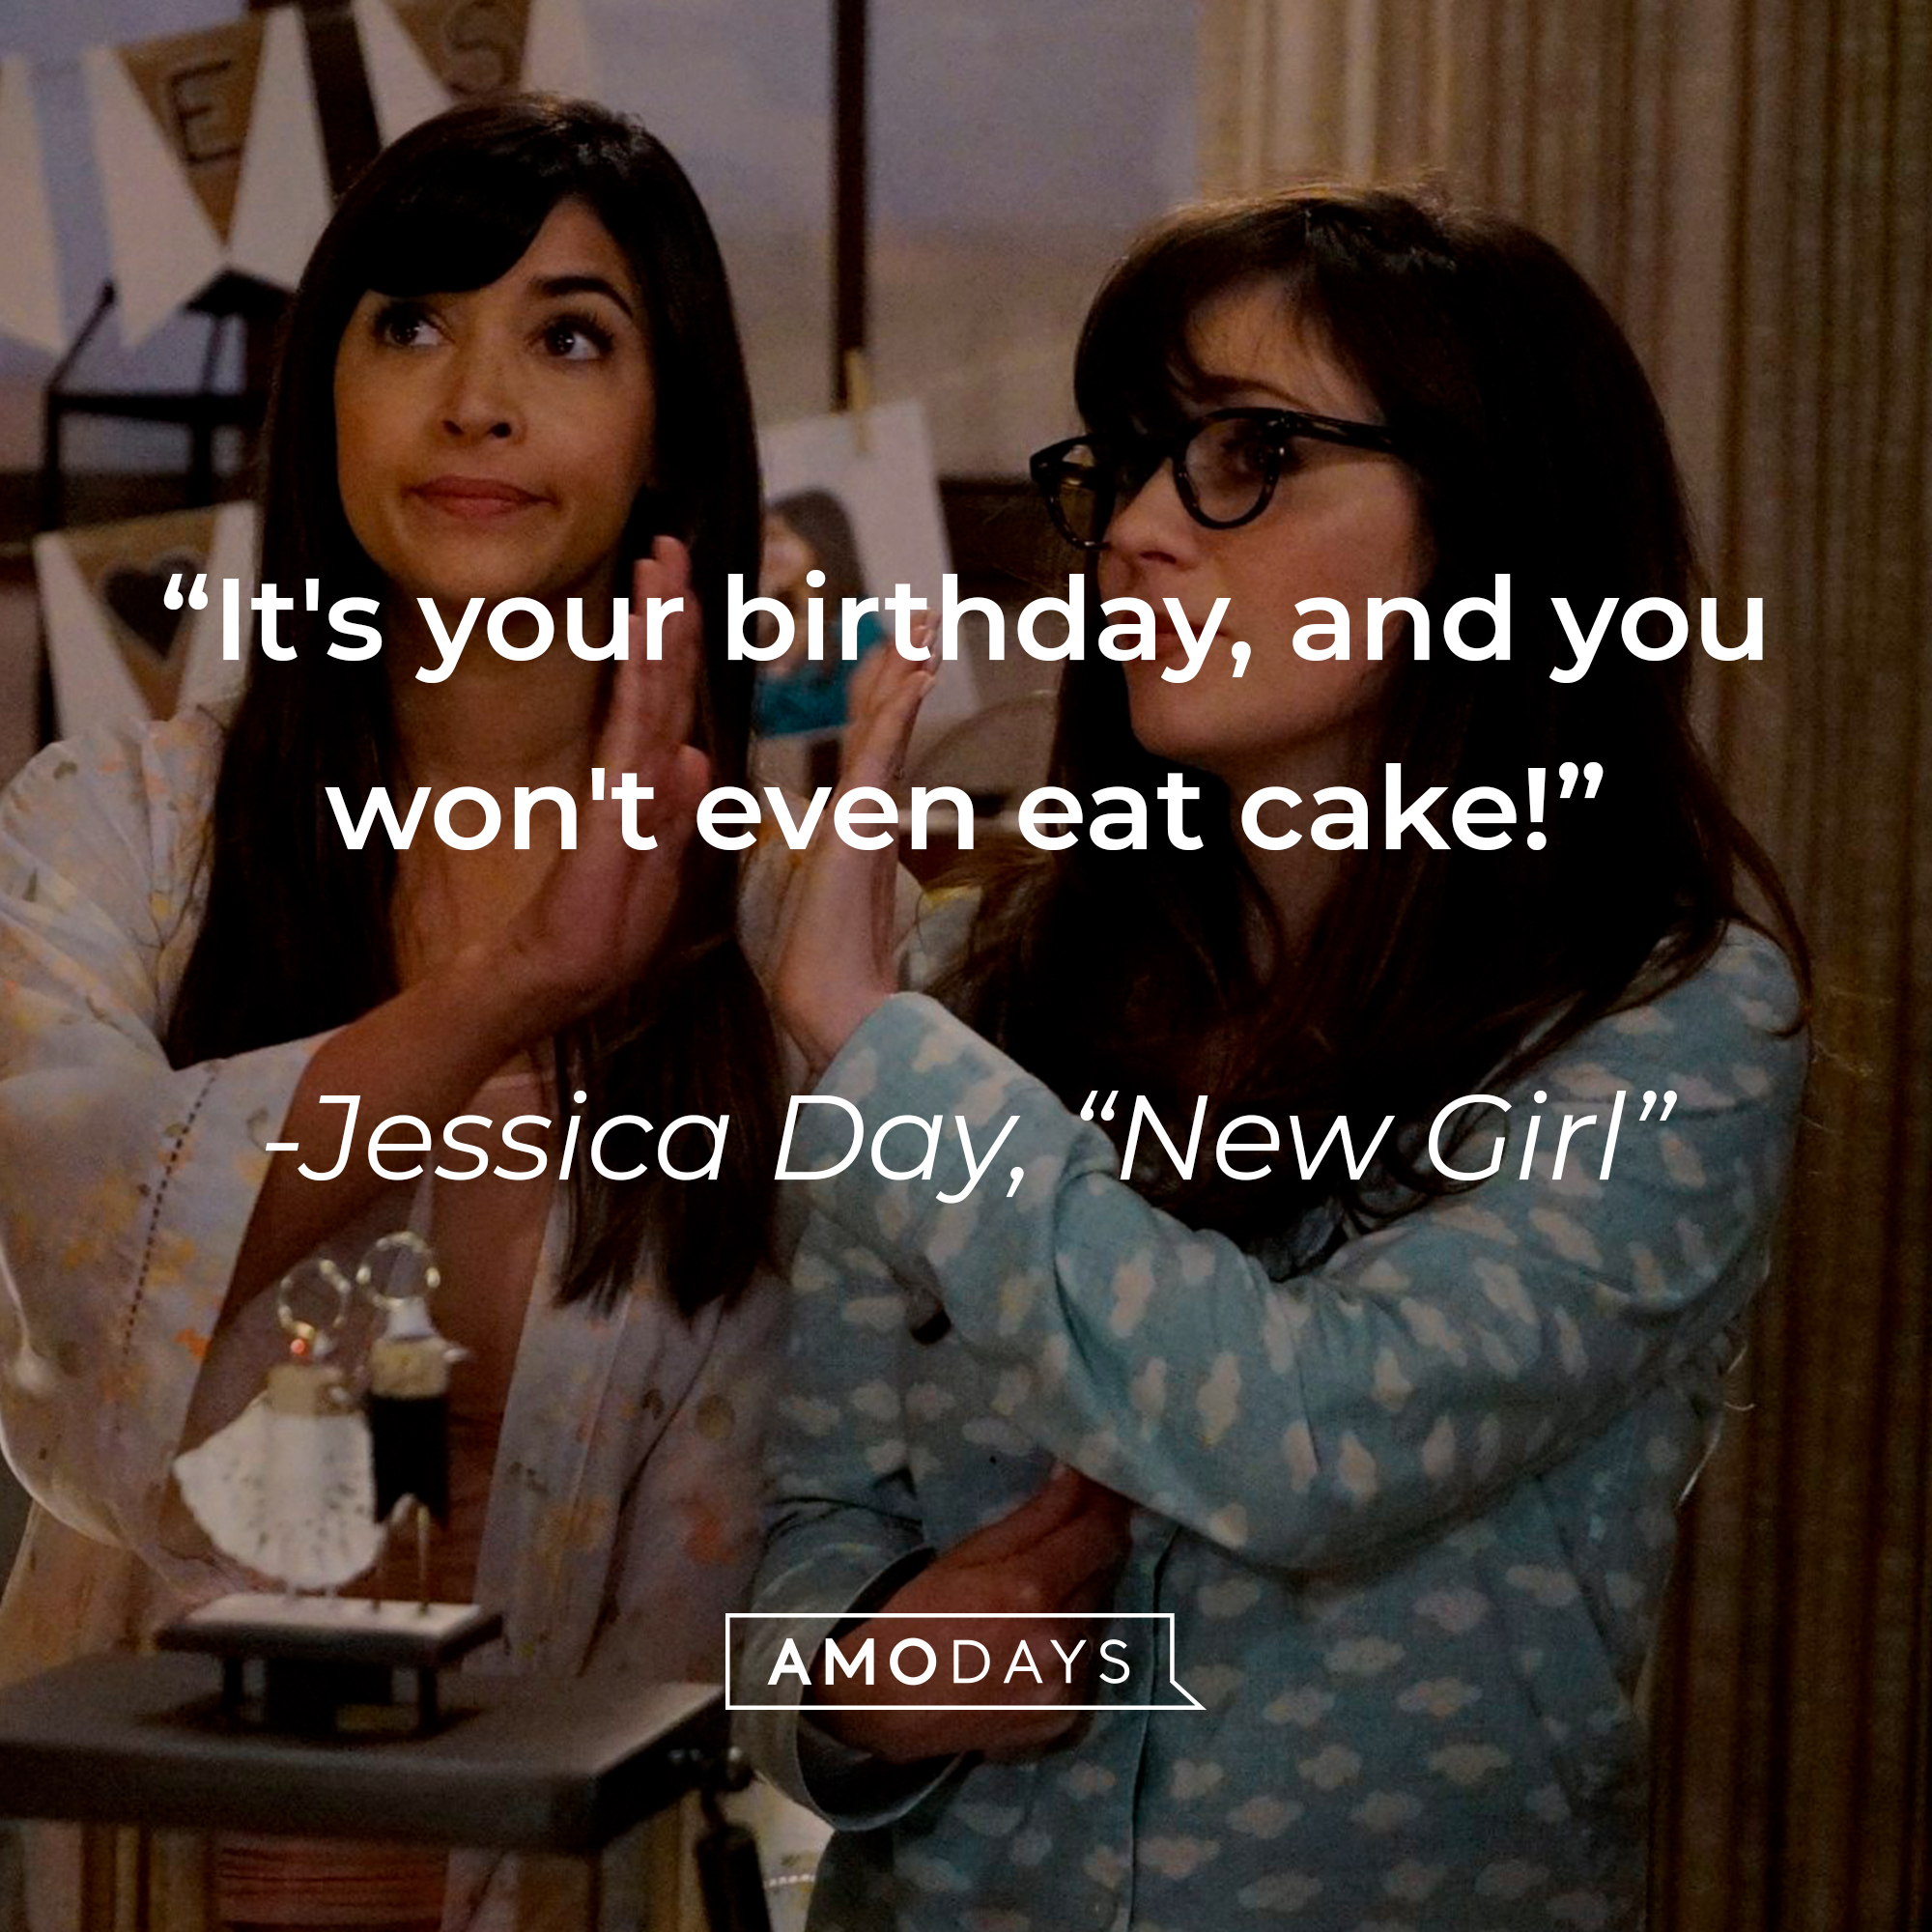 Jessica Day’s quote from “New Girl”: “It's your birthday, and you won't even eat cake!” | Source: facebook.com/OfficialNewGirl